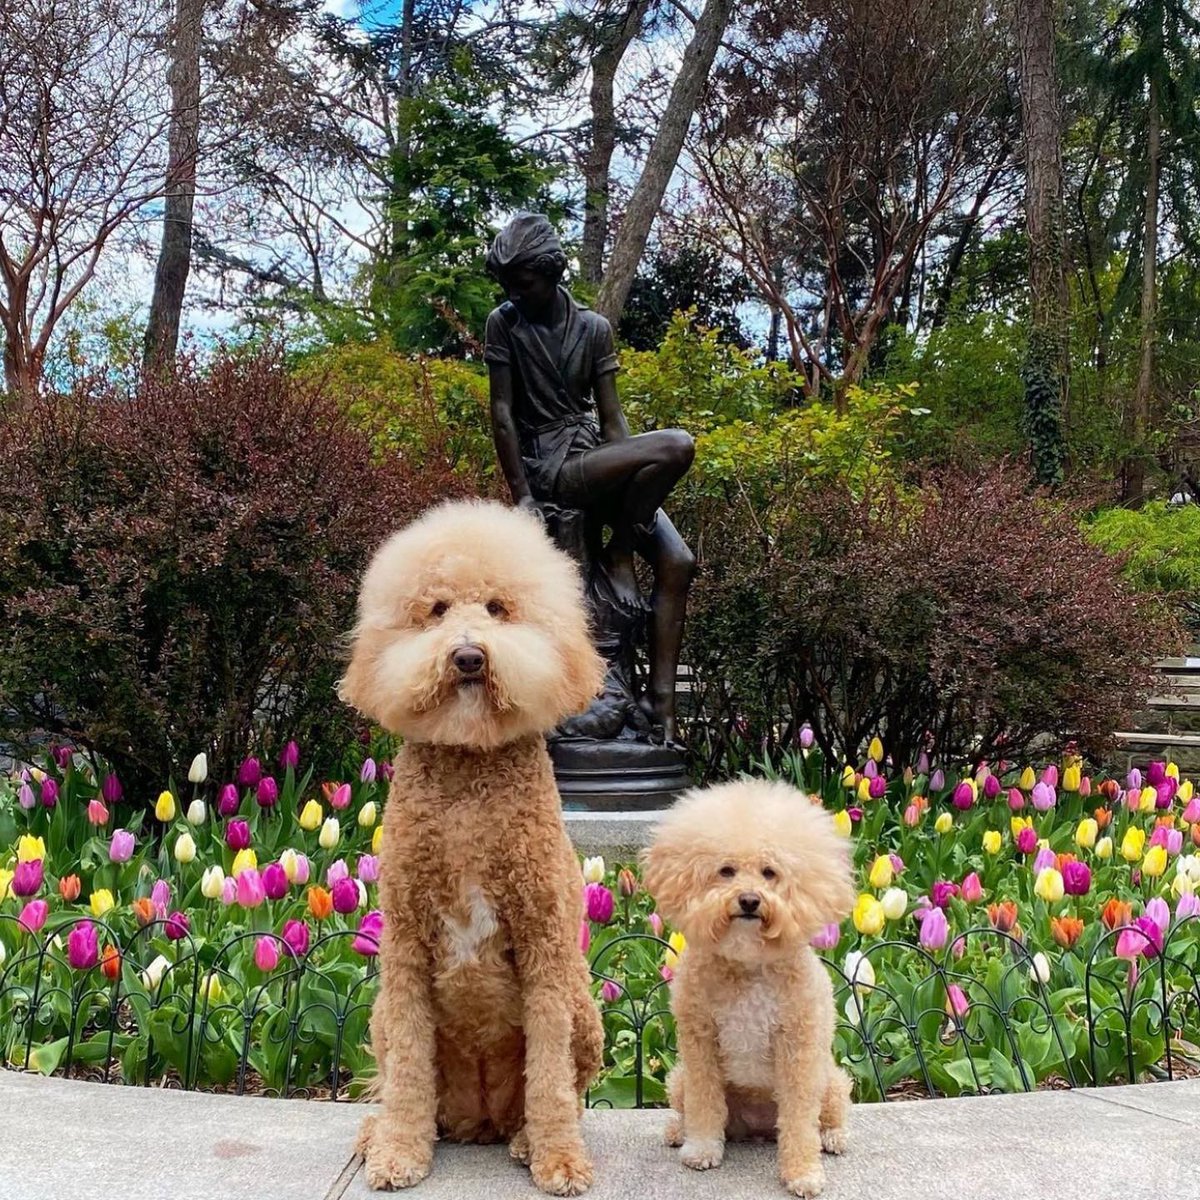 Sniffing spring flowers in style. Carl Schurz Park along the East River is for dog walks, sunshine, blooming flowers, and endless tail wags. ☀️🐾 🌷 #LoewsLovesPets #LoewsRegency 📷: @puppynamedcharlie